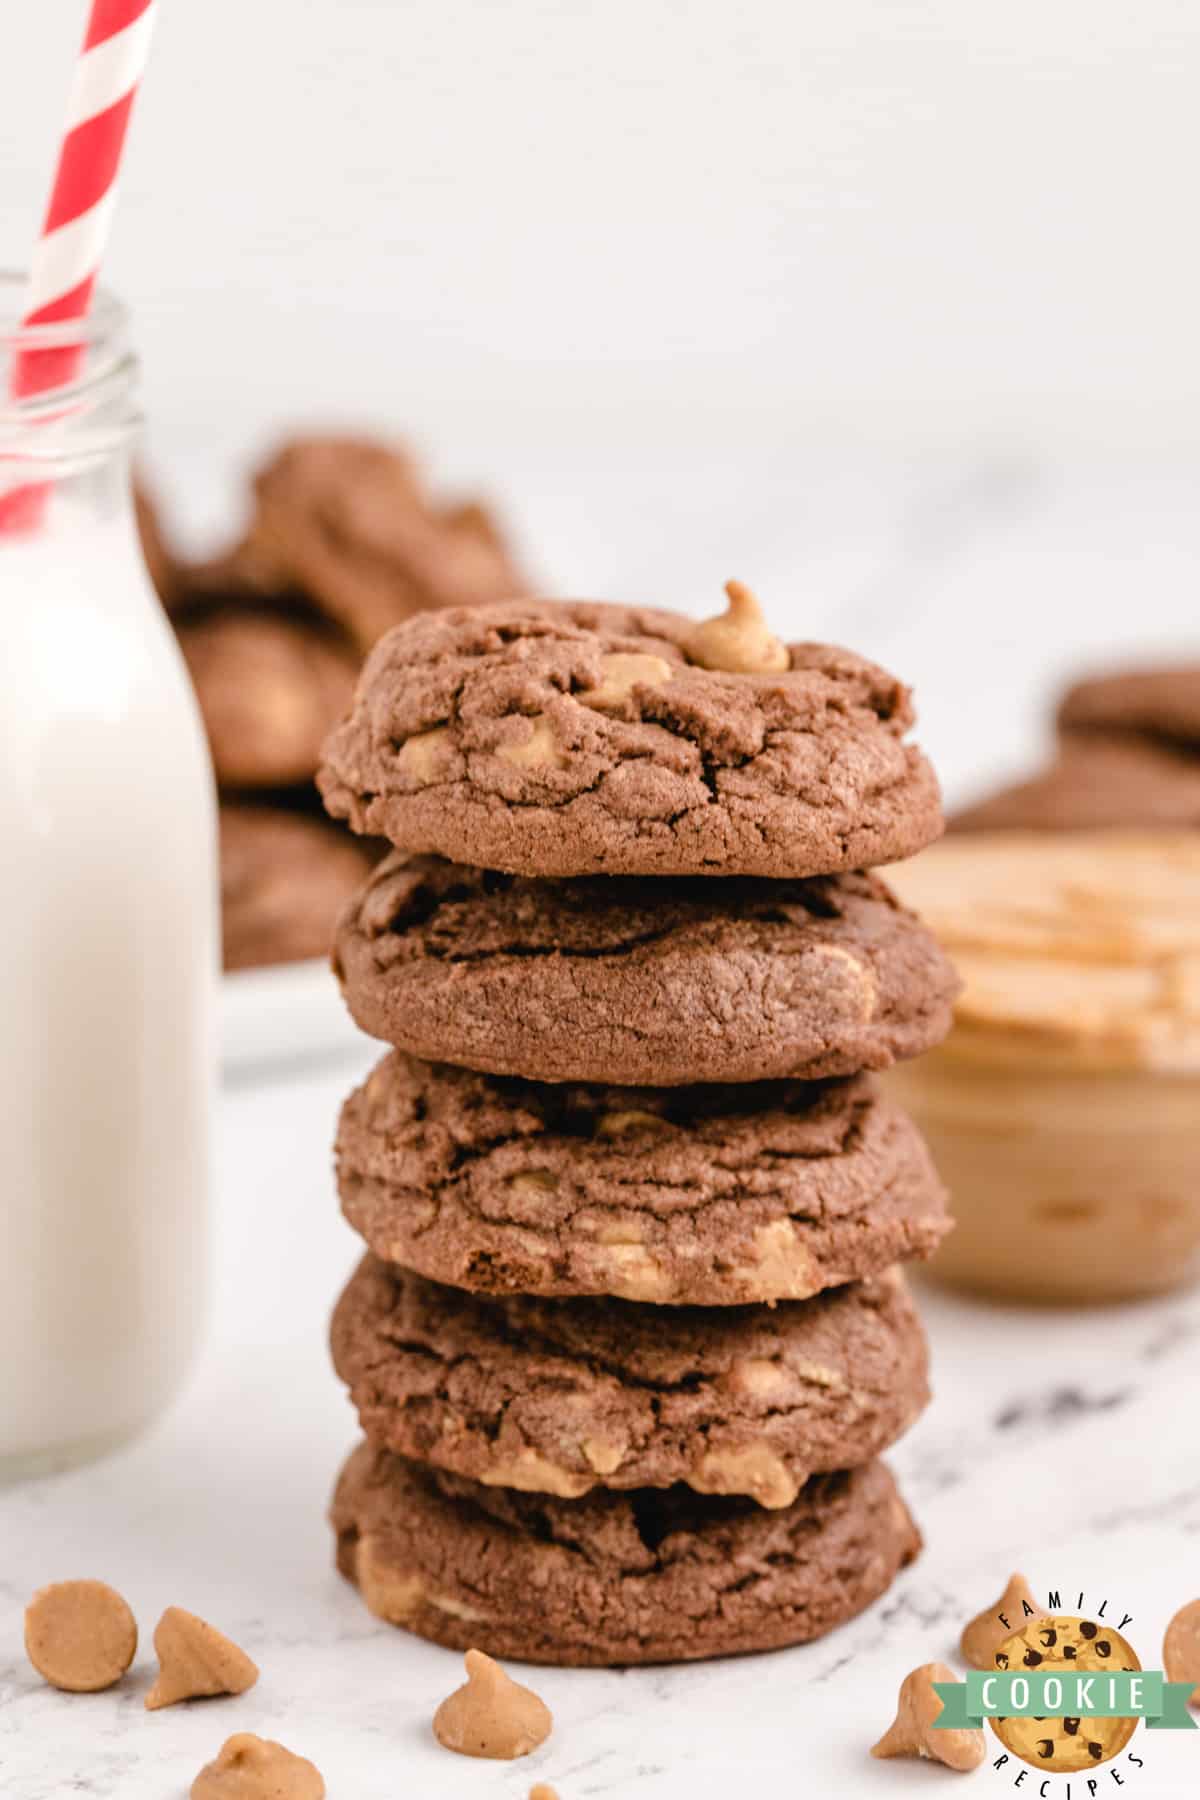 Chocolate Peanut Butter Chip Cookies made with chocolate pudding mix for a soft and chewy cookie that is loaded with chocolate flavor and Reese's peanut butter chips.